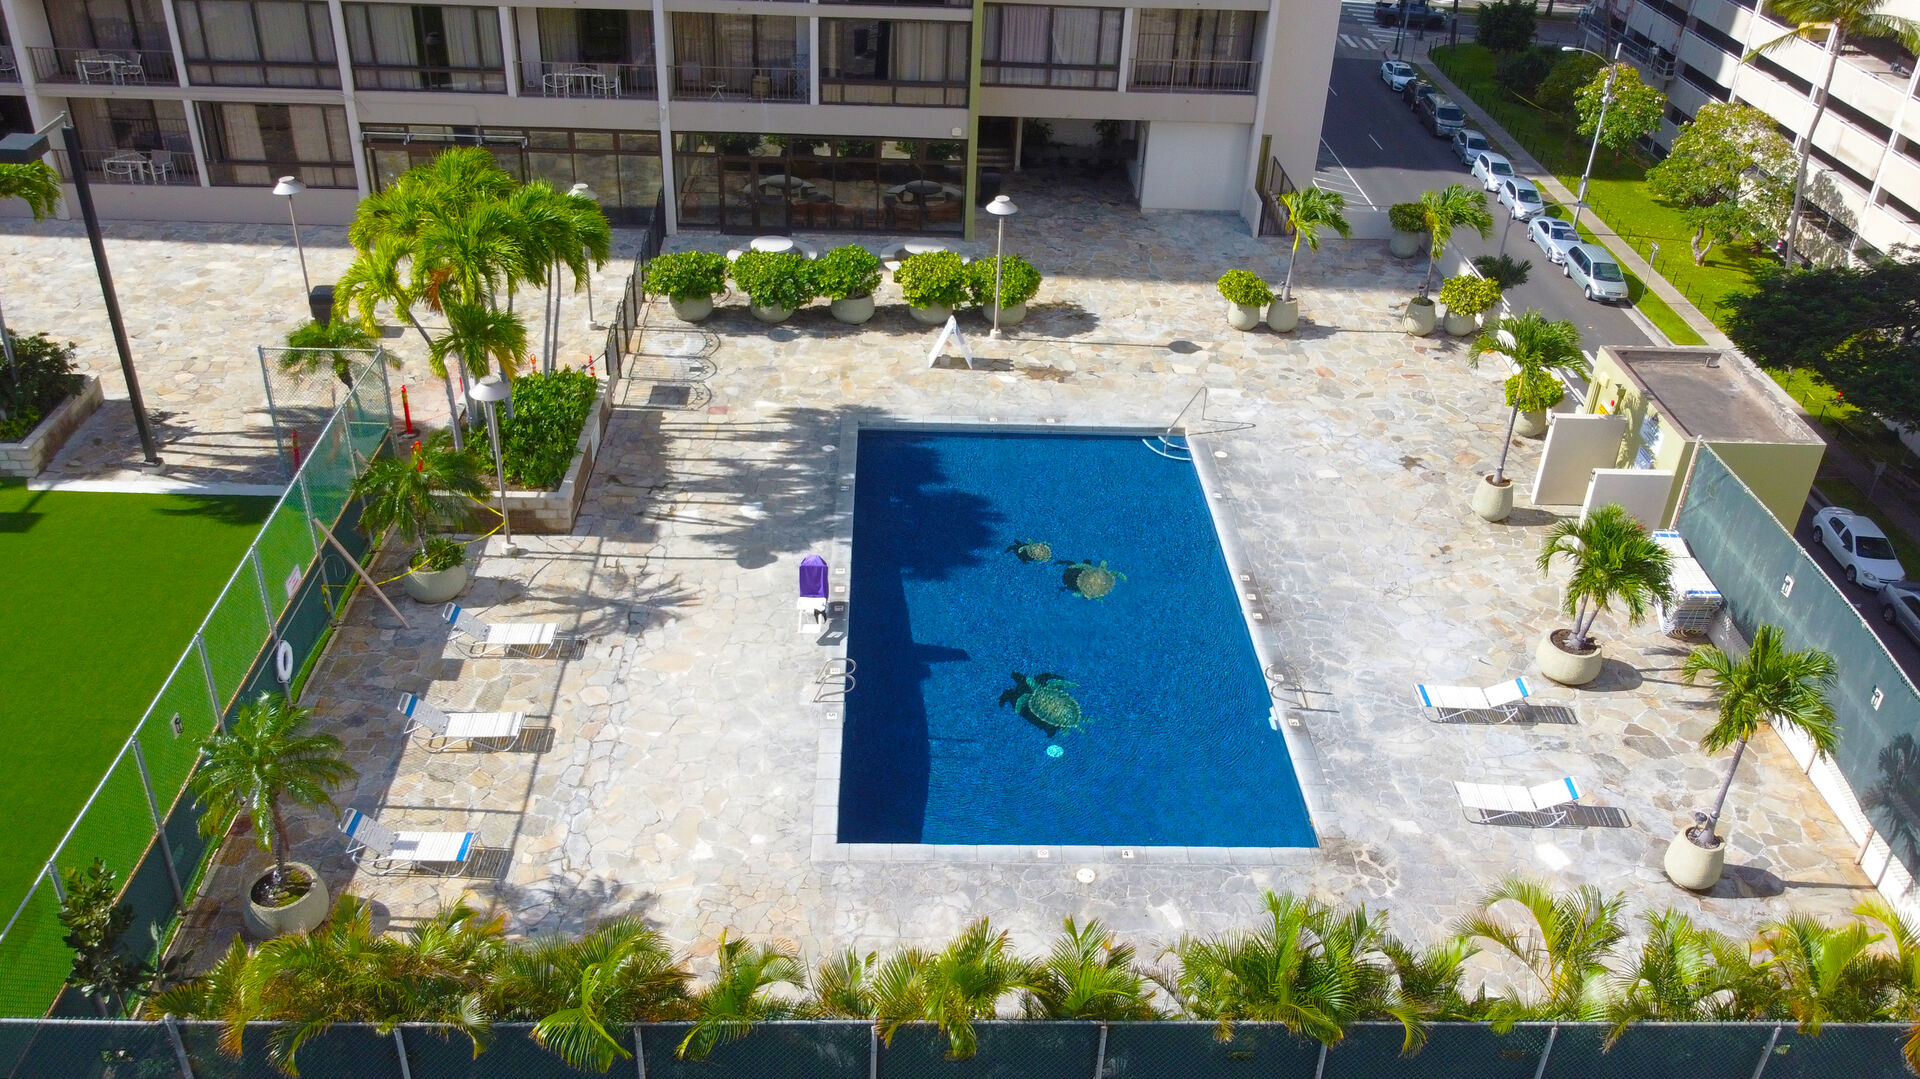 Swimming pool and BBQ area on the Recreation Deck